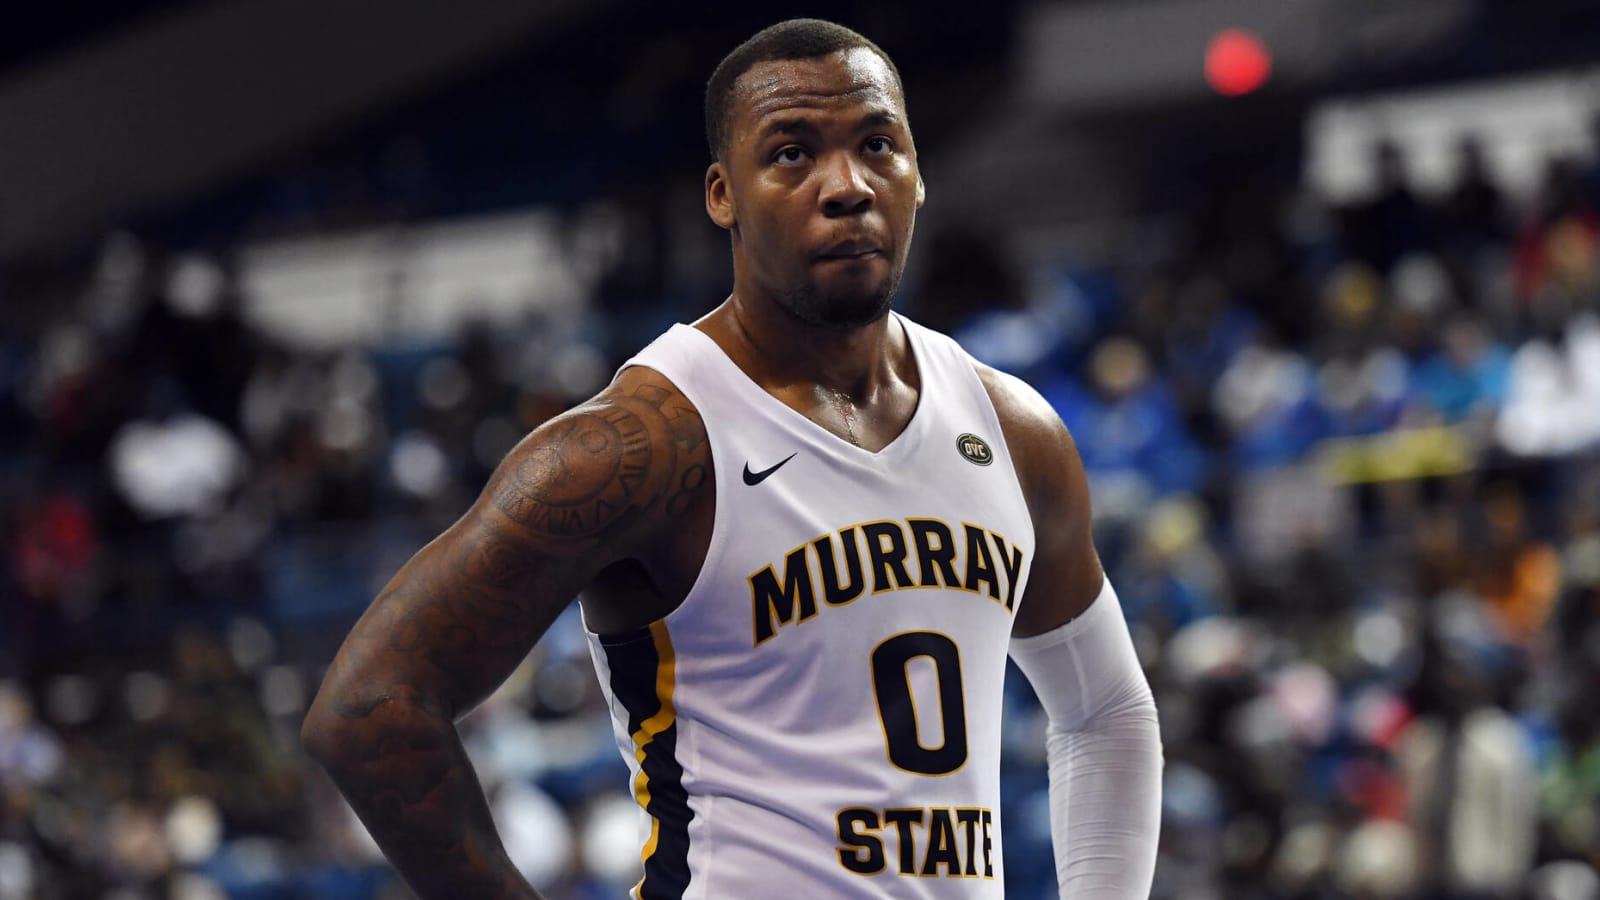 Murray State wins, becomes first team invited to the big dance